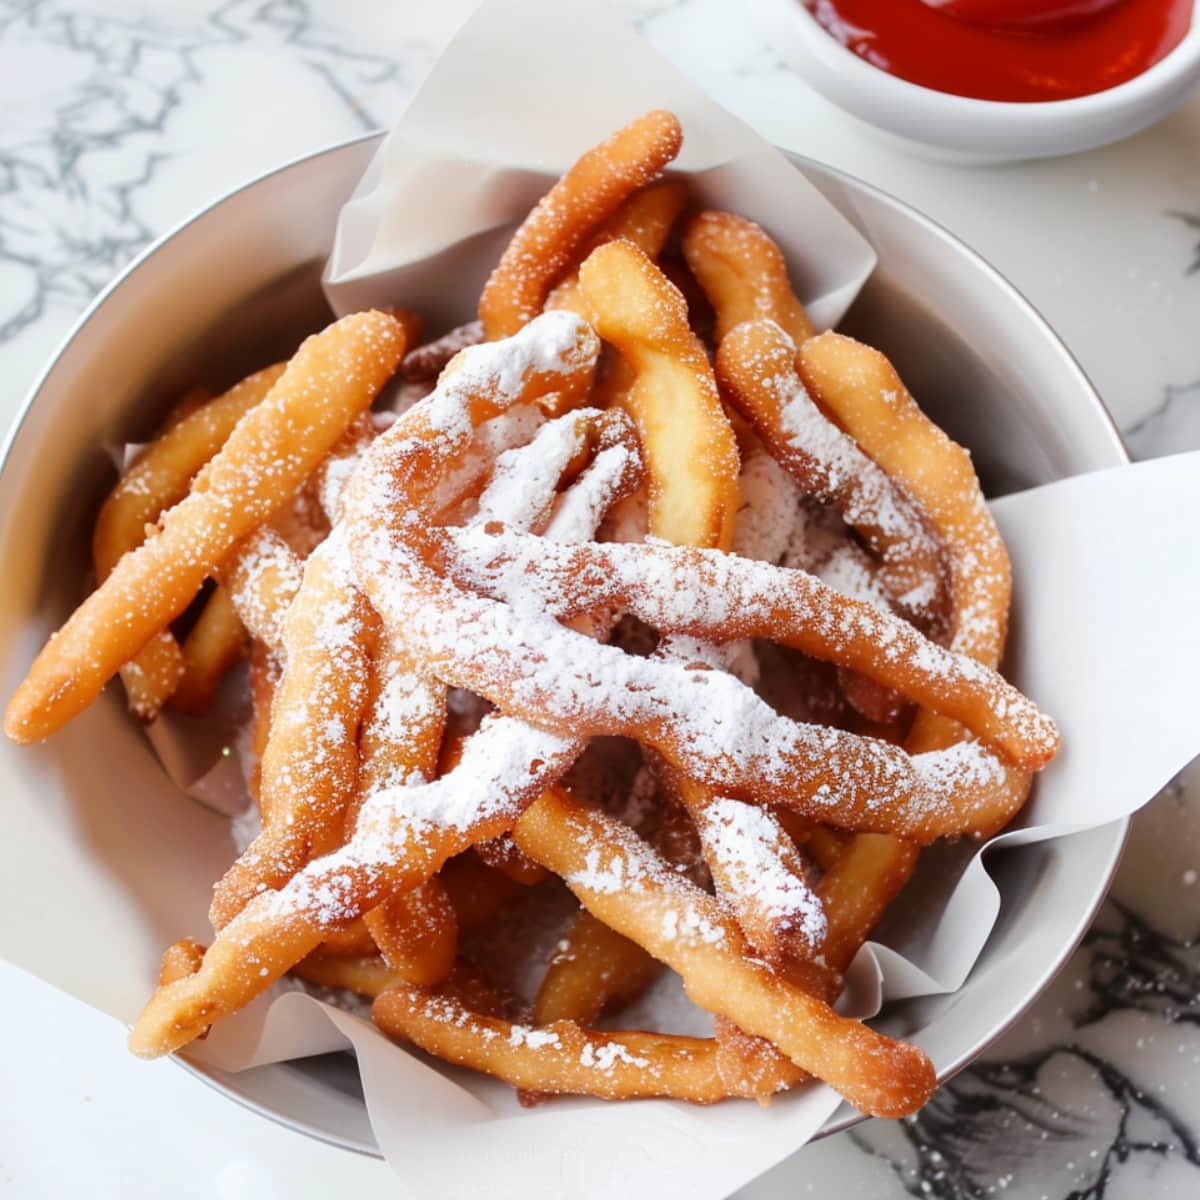 Comforting funnel cake fries served with ketchup, a delightful twist on the classic treat that's sure to satisfy your sweet tooth